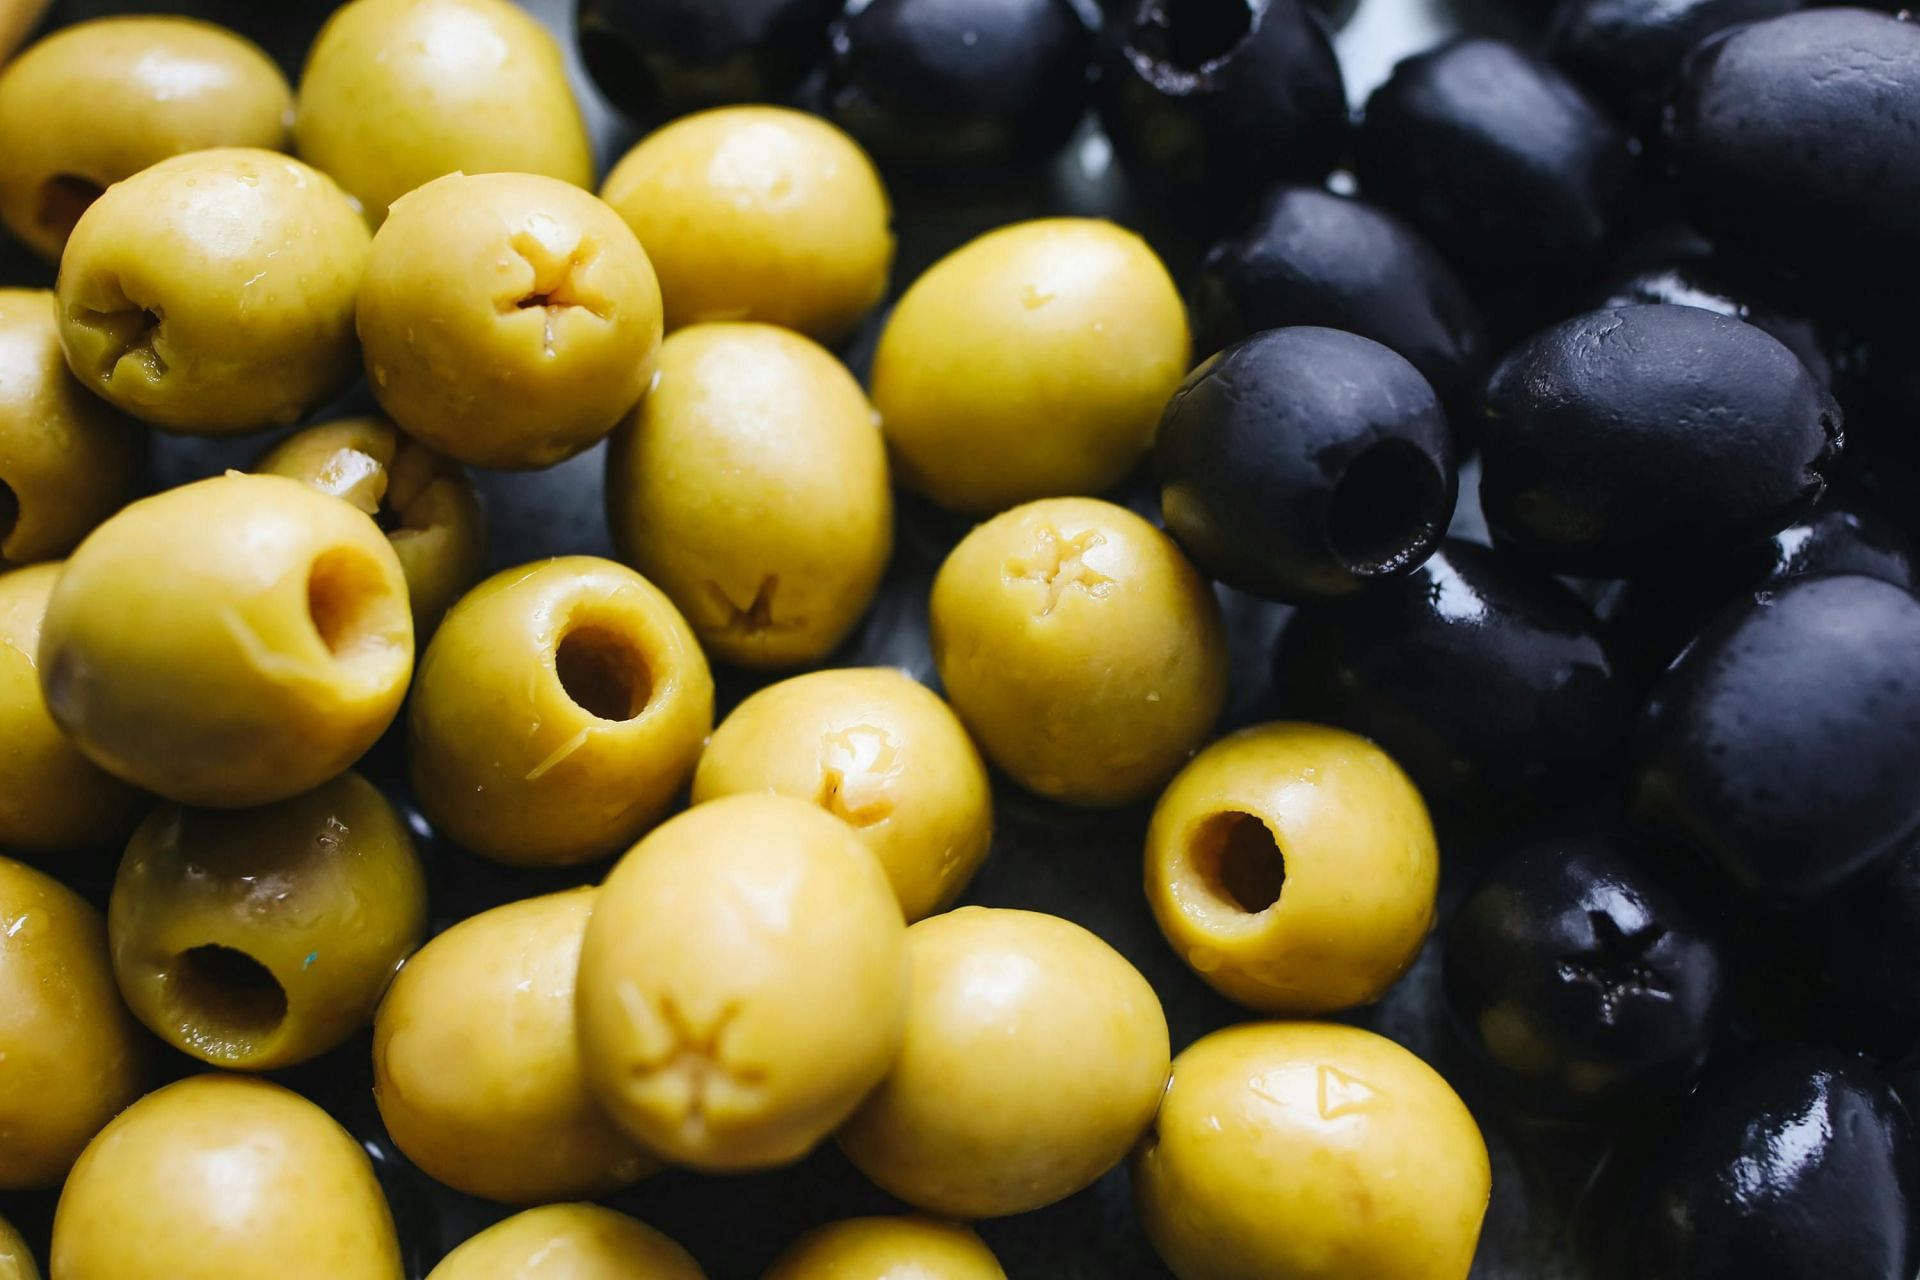 benefits of olive oil (image sourced via Pexels / Photo by Polina)